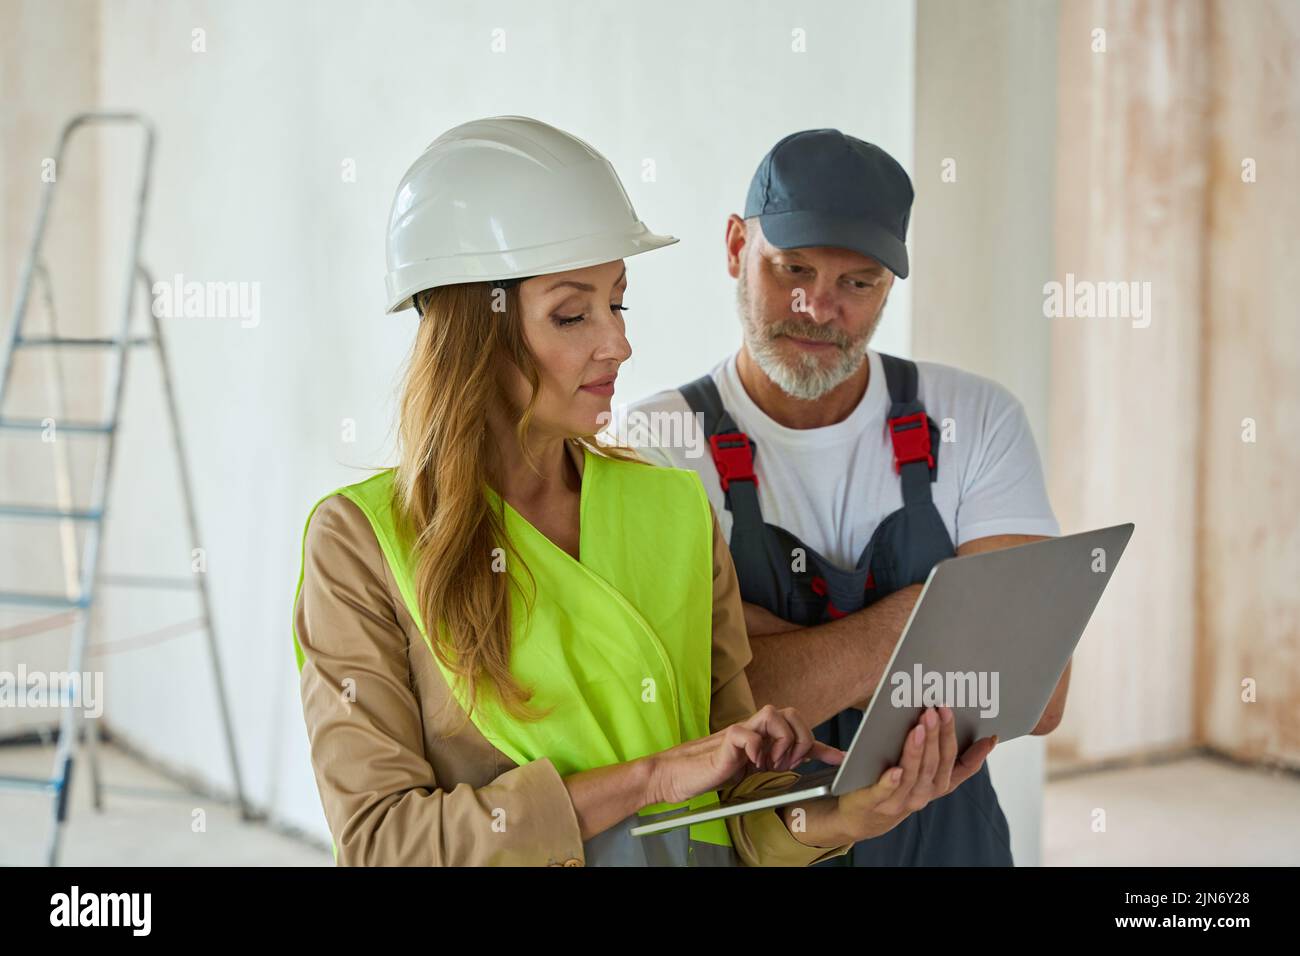 Manager holds open laptop and shows it to builder Stock Photo